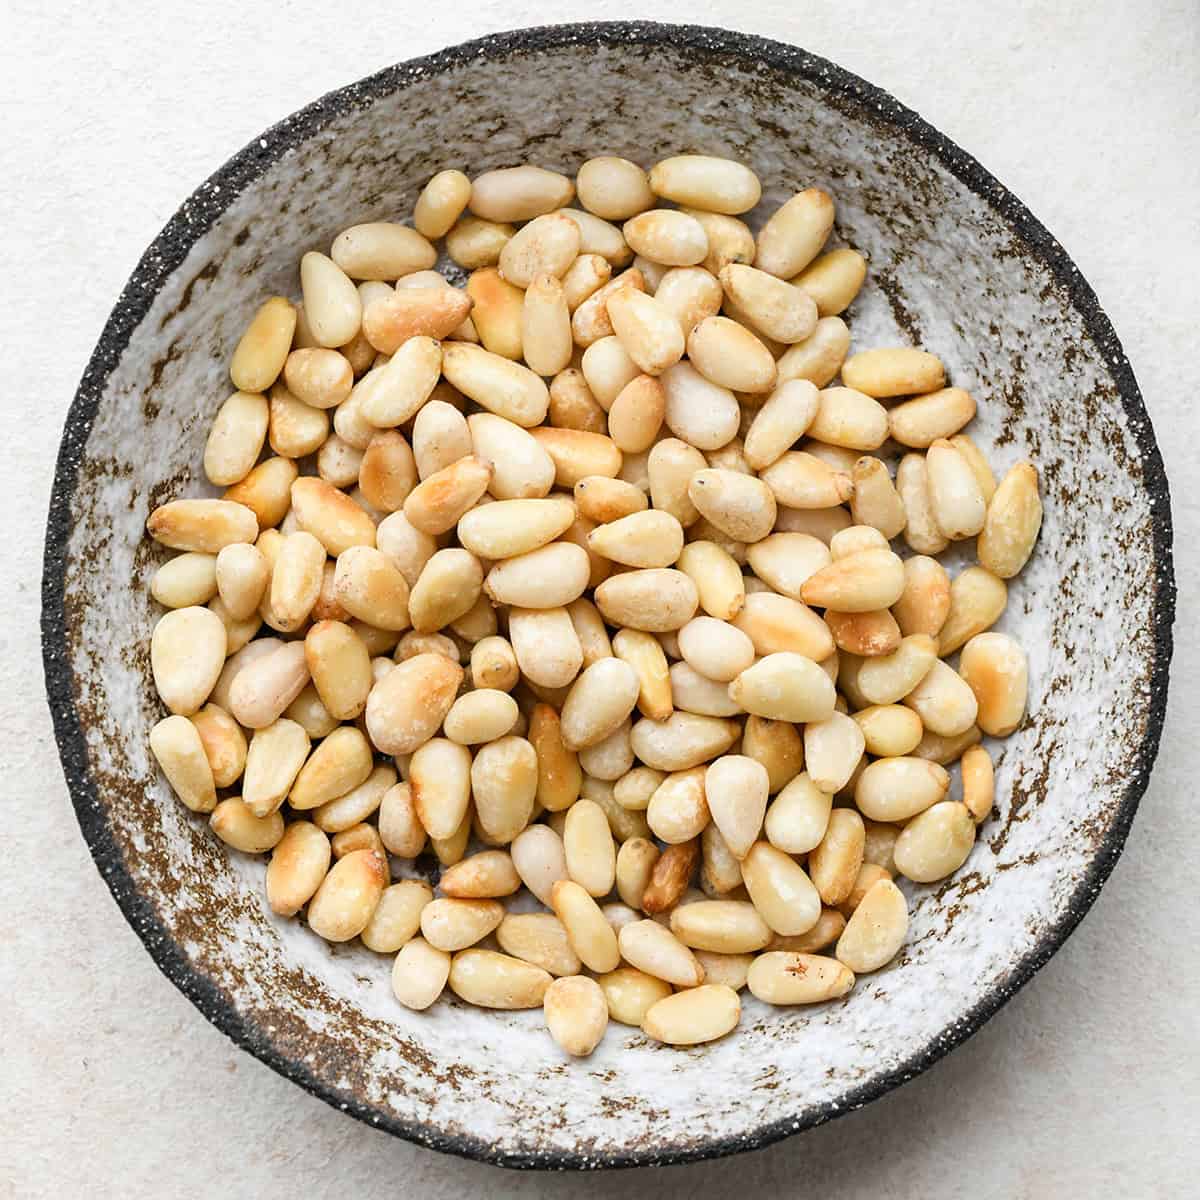 How to Make Pesto Sauce - toasted pine nuts in a bowl